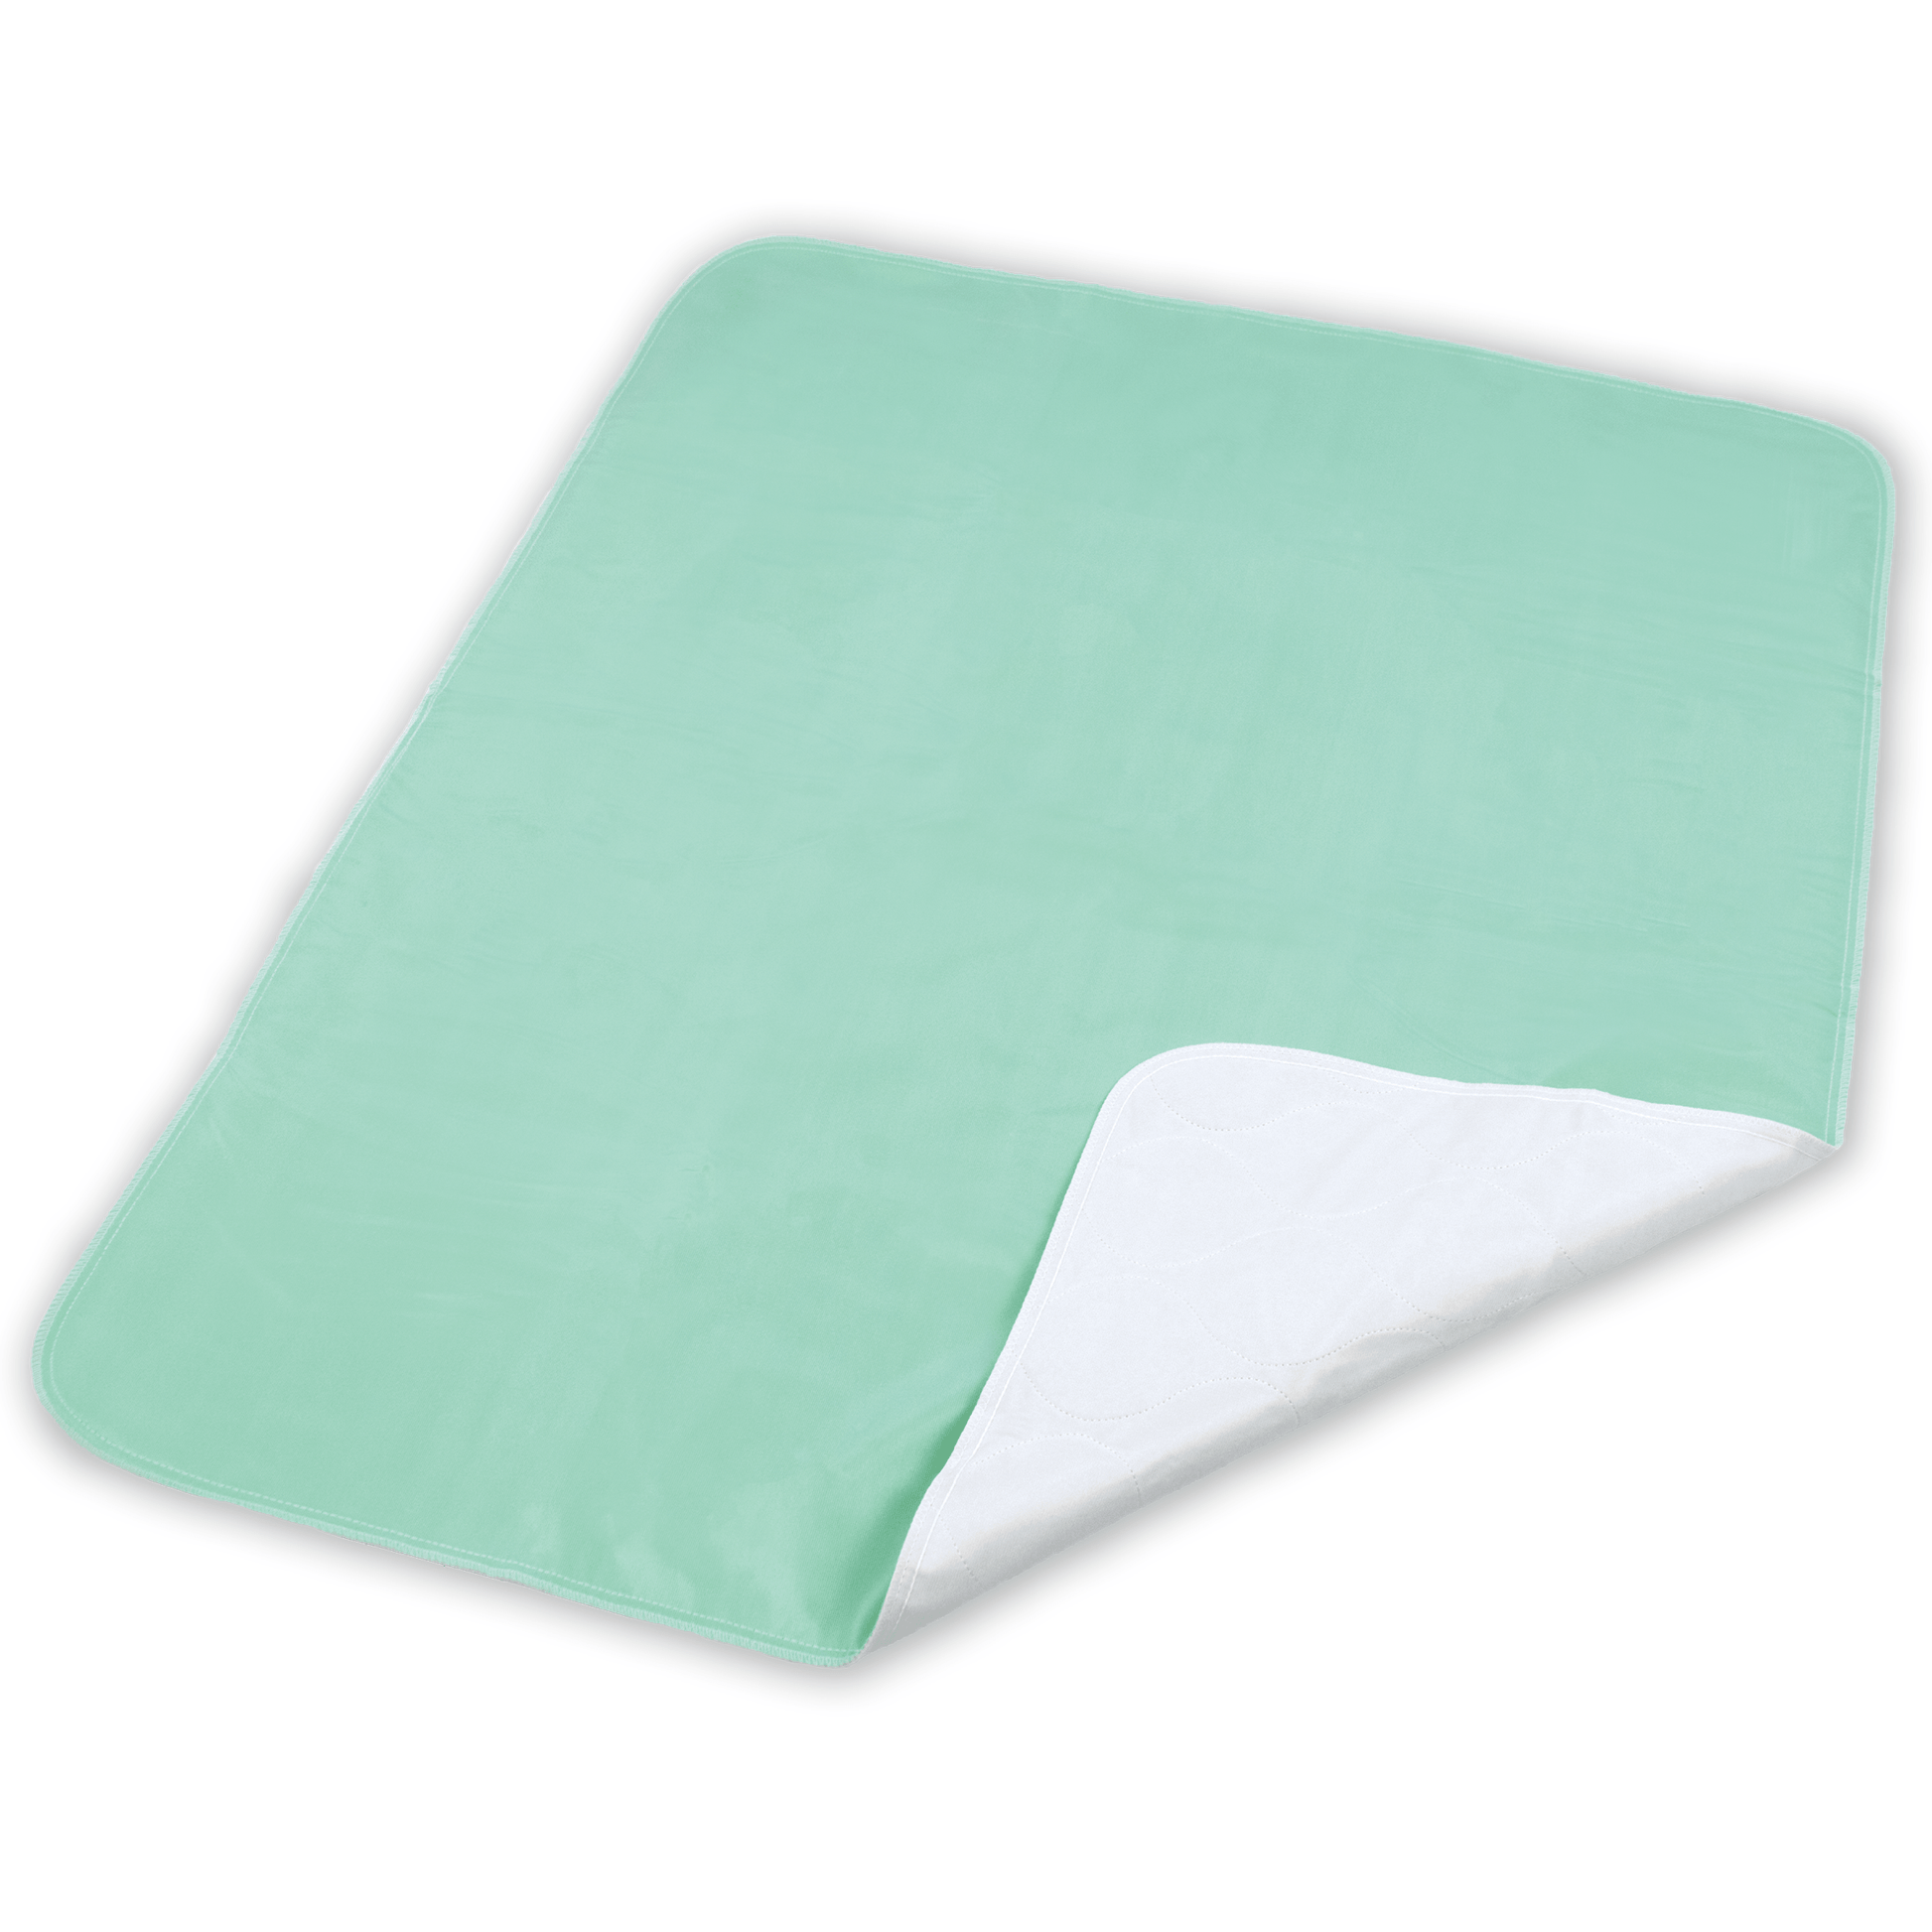  Reusable Underpads: Health & Personal Care